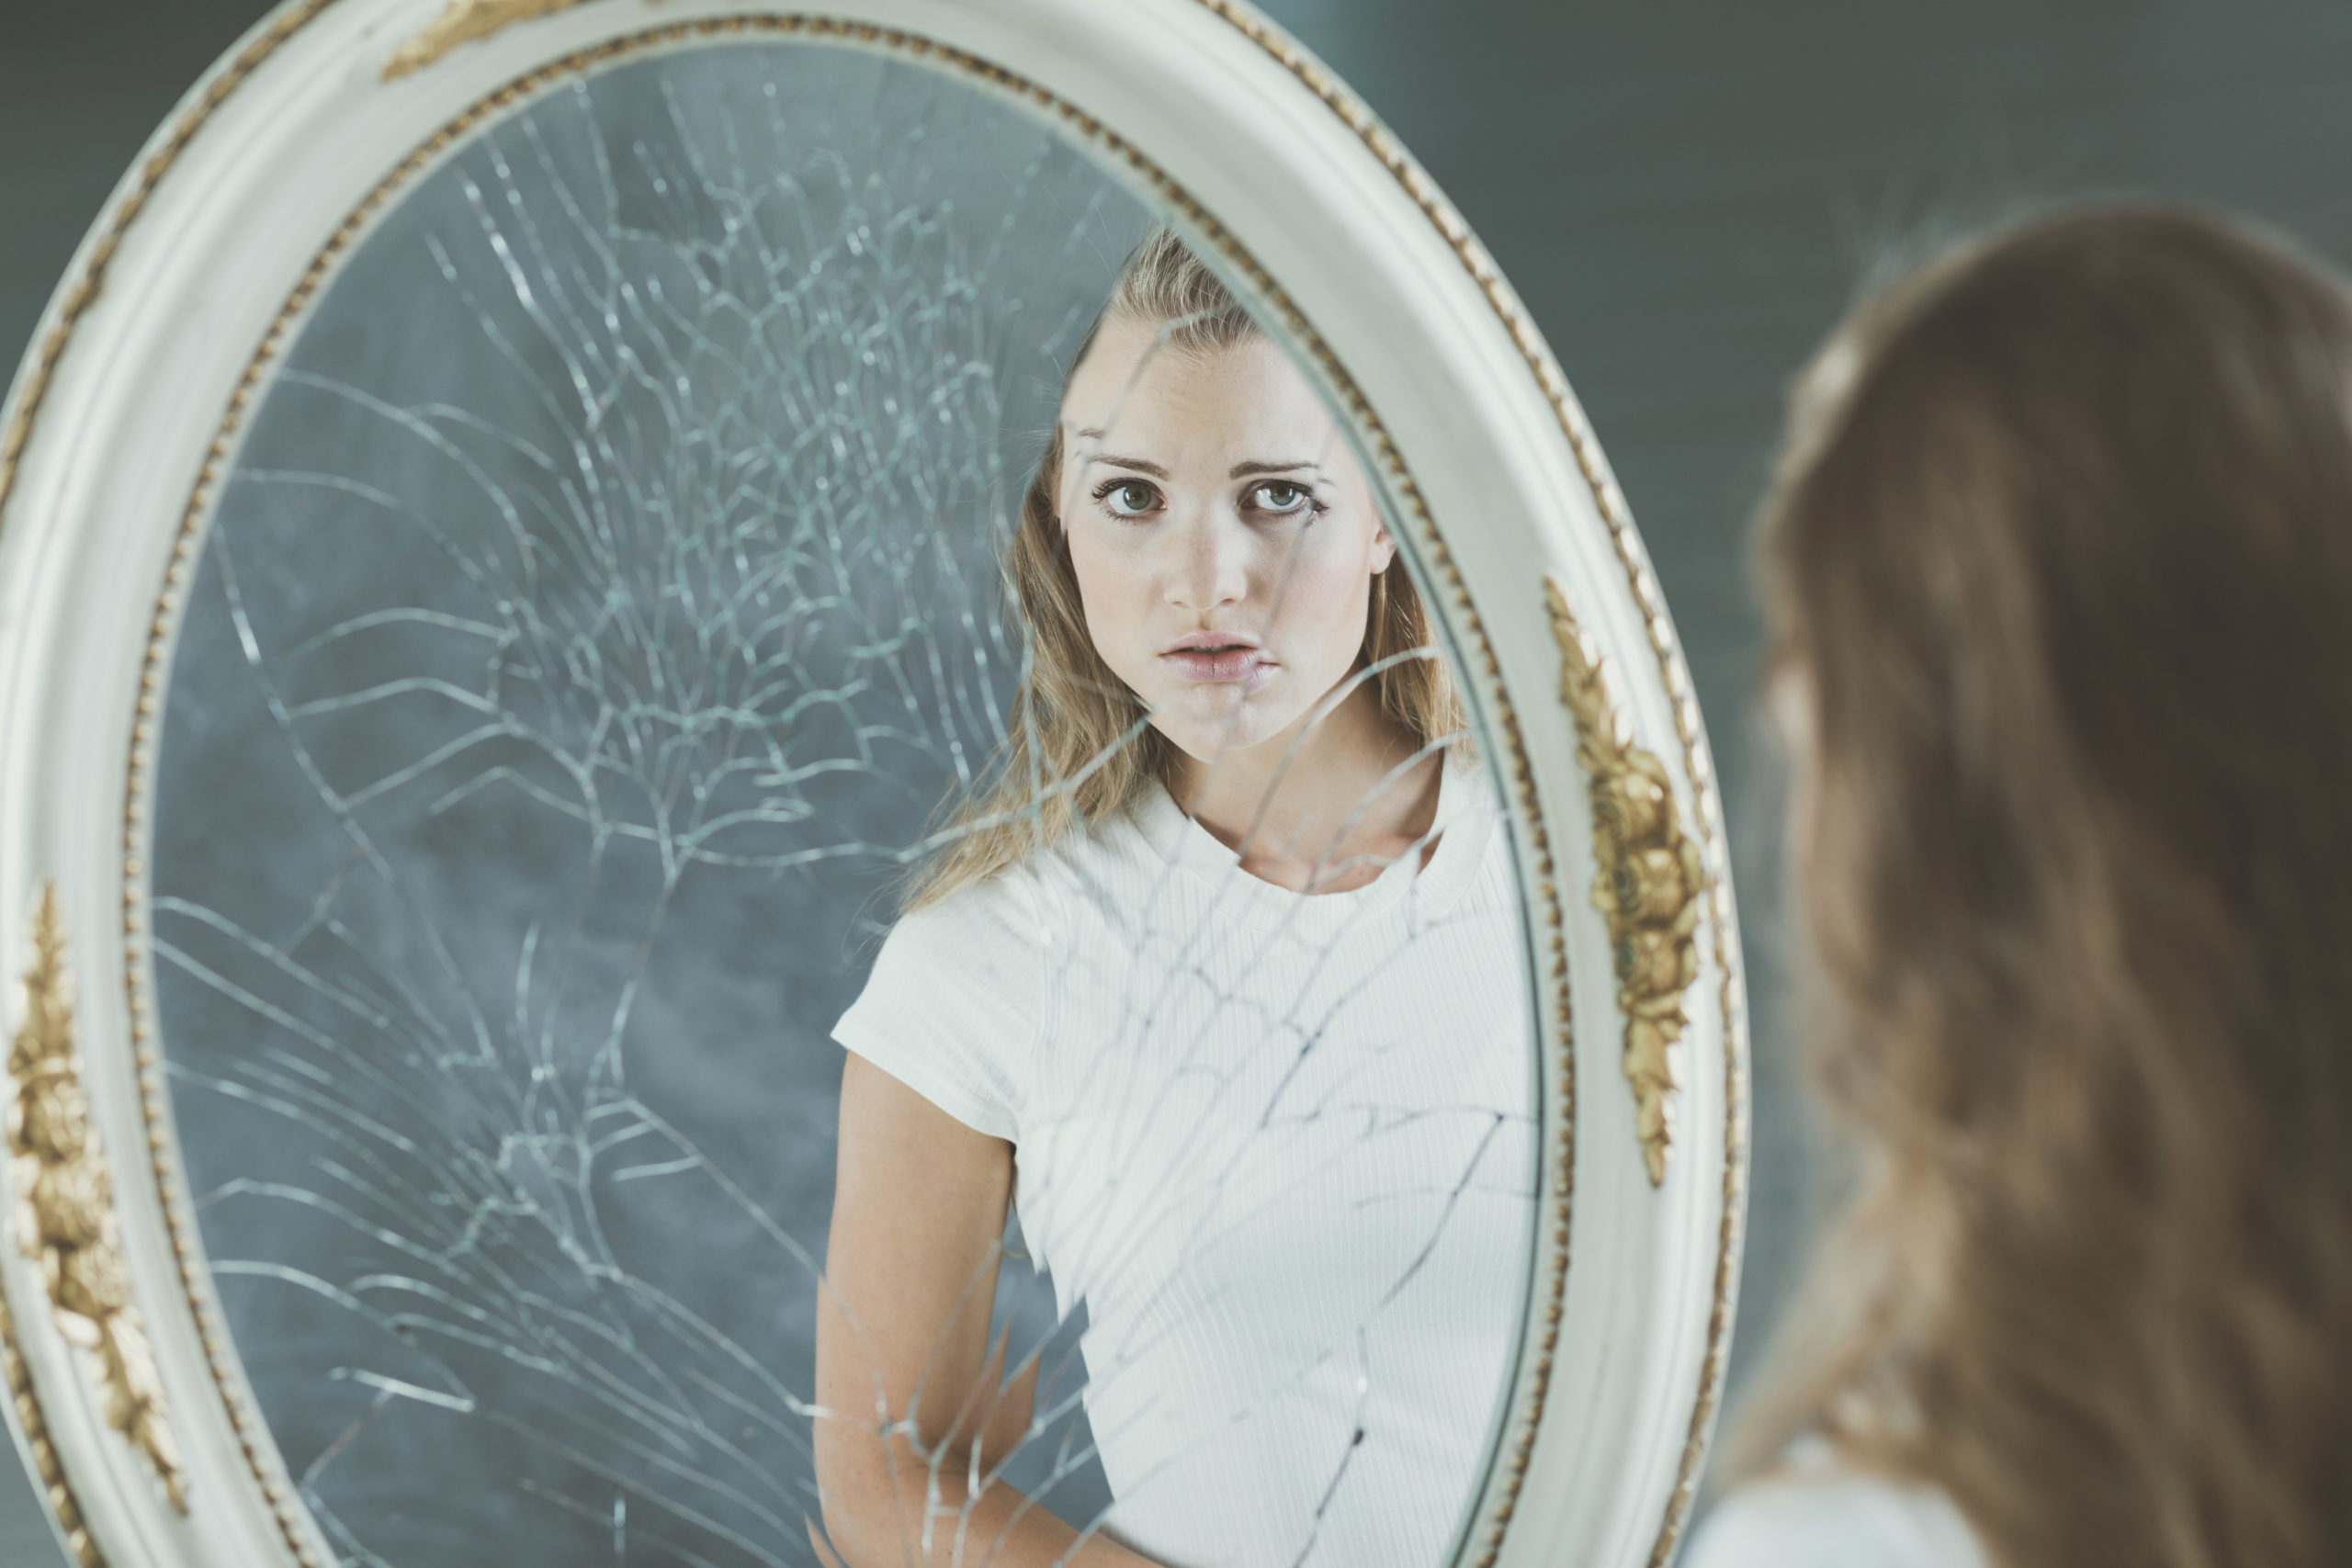 Pretty teenage girl with personality problems looking at herself in the mirror